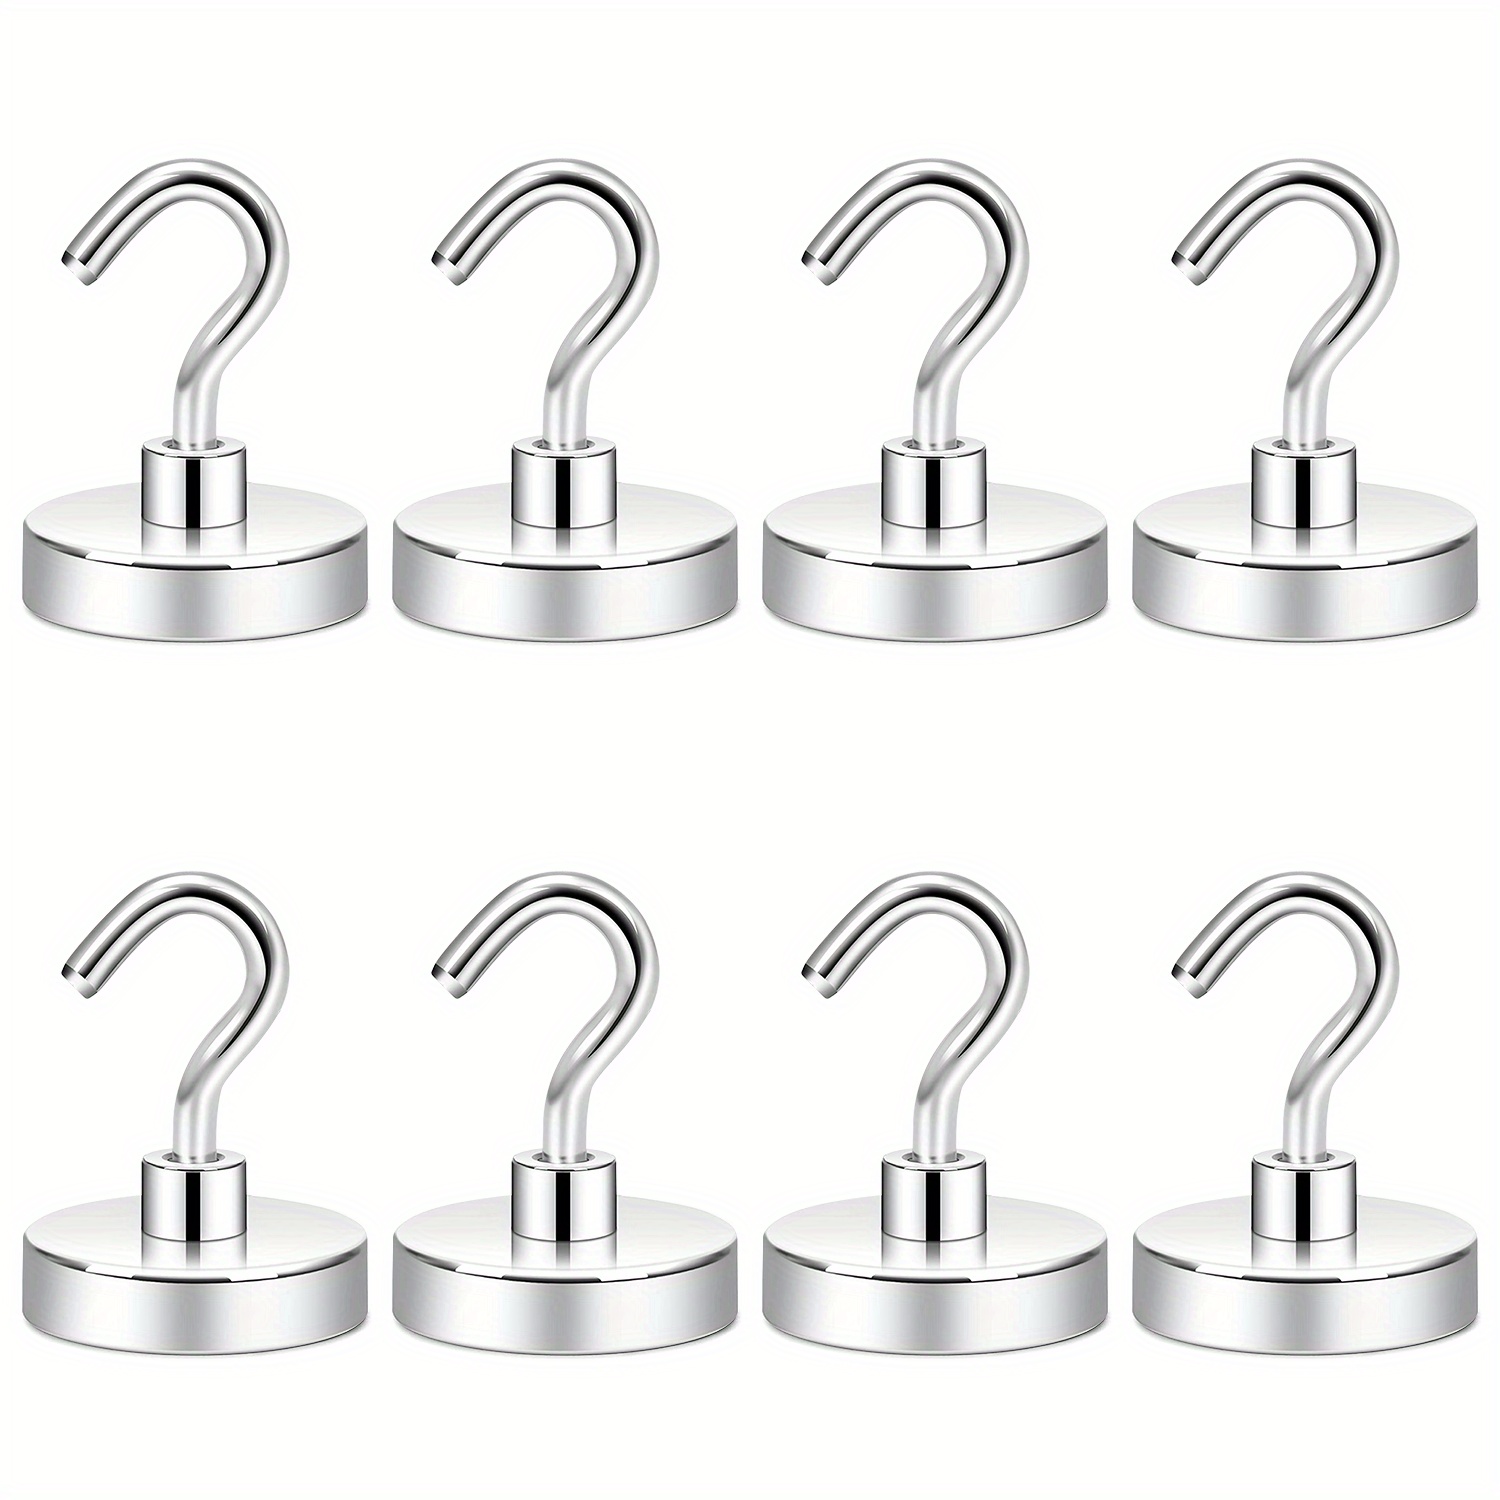 100lbs Strong Neodymium Magnet Hooks with Epoxy Coating for Home